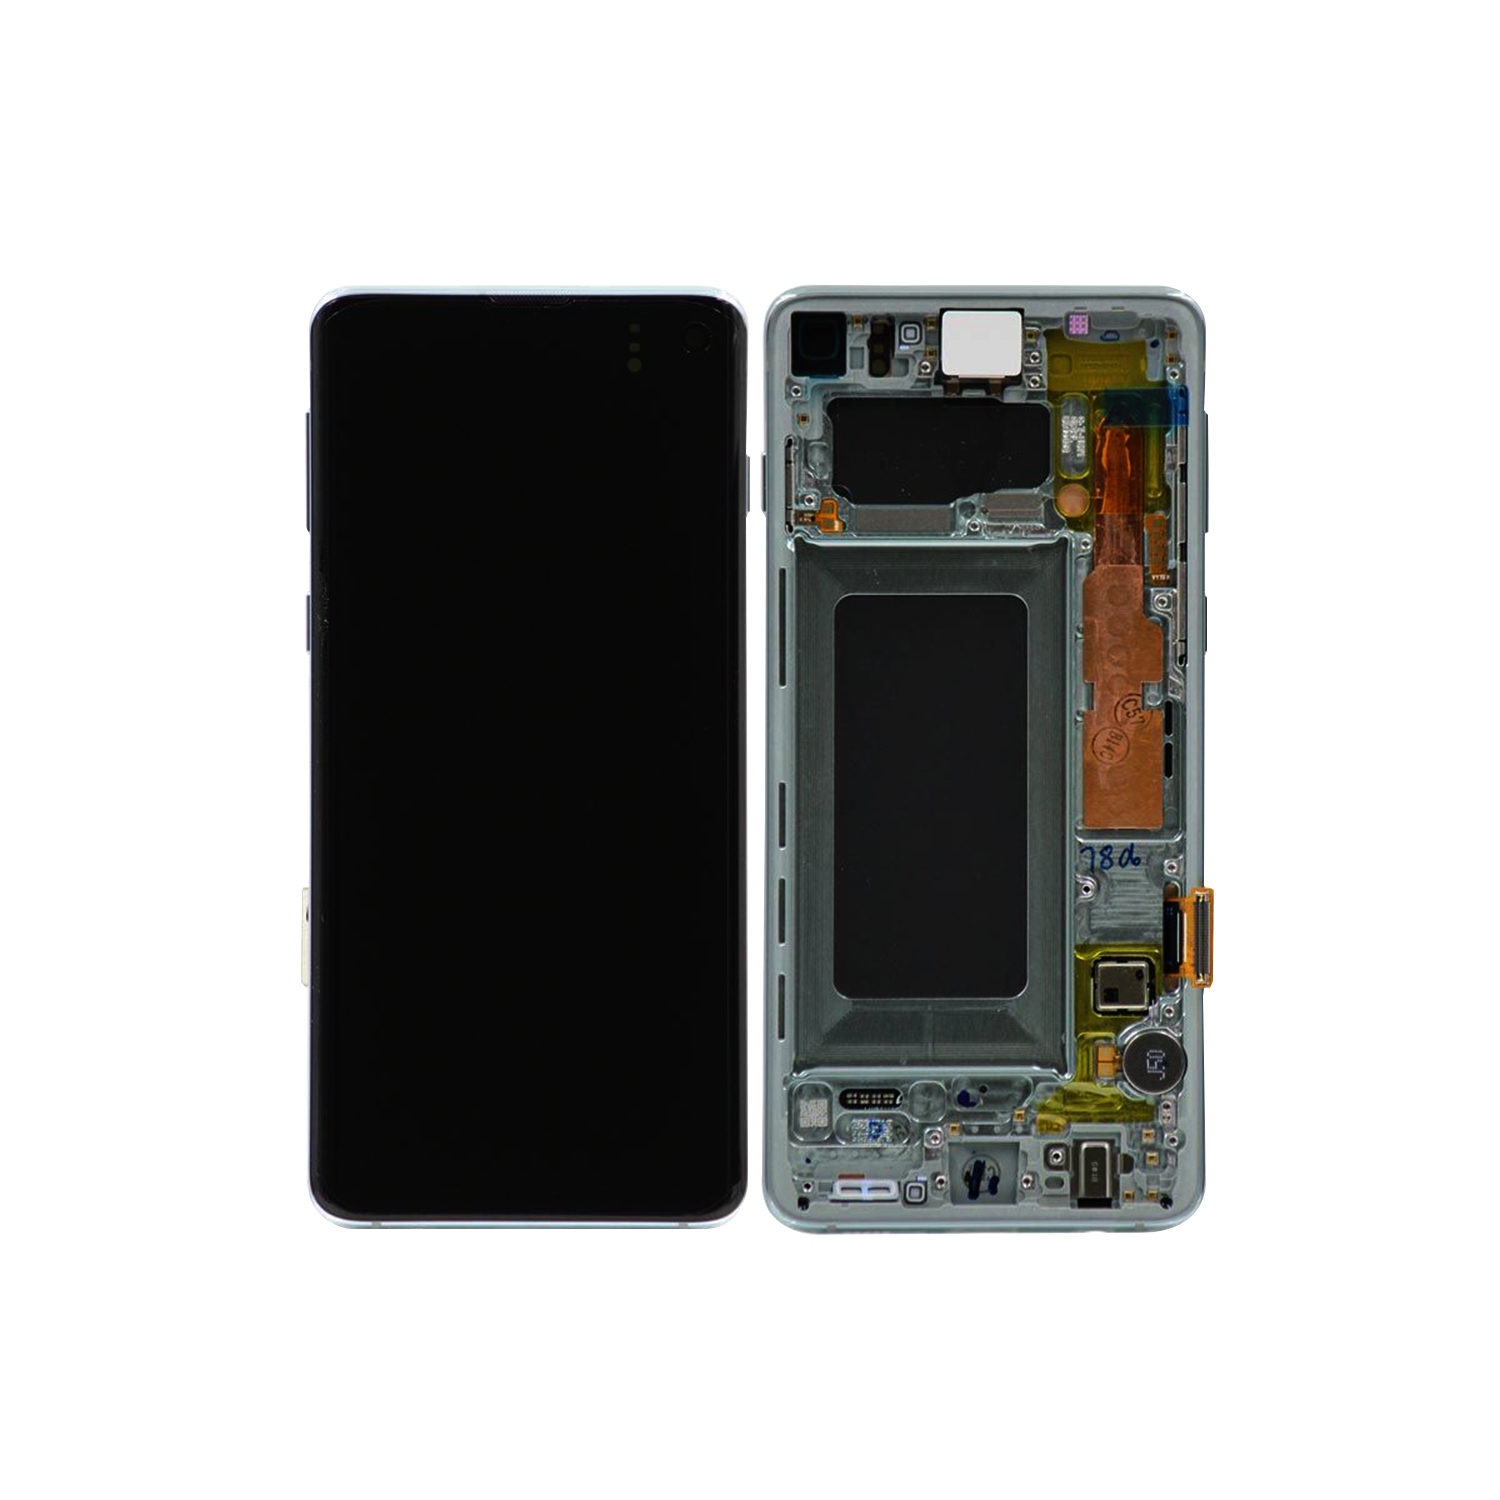 Replacement LCD Display Touch Screen Digitizer Assembly With Frame For Samsung Galaxy S10 (SM-G973W) - Prism Green